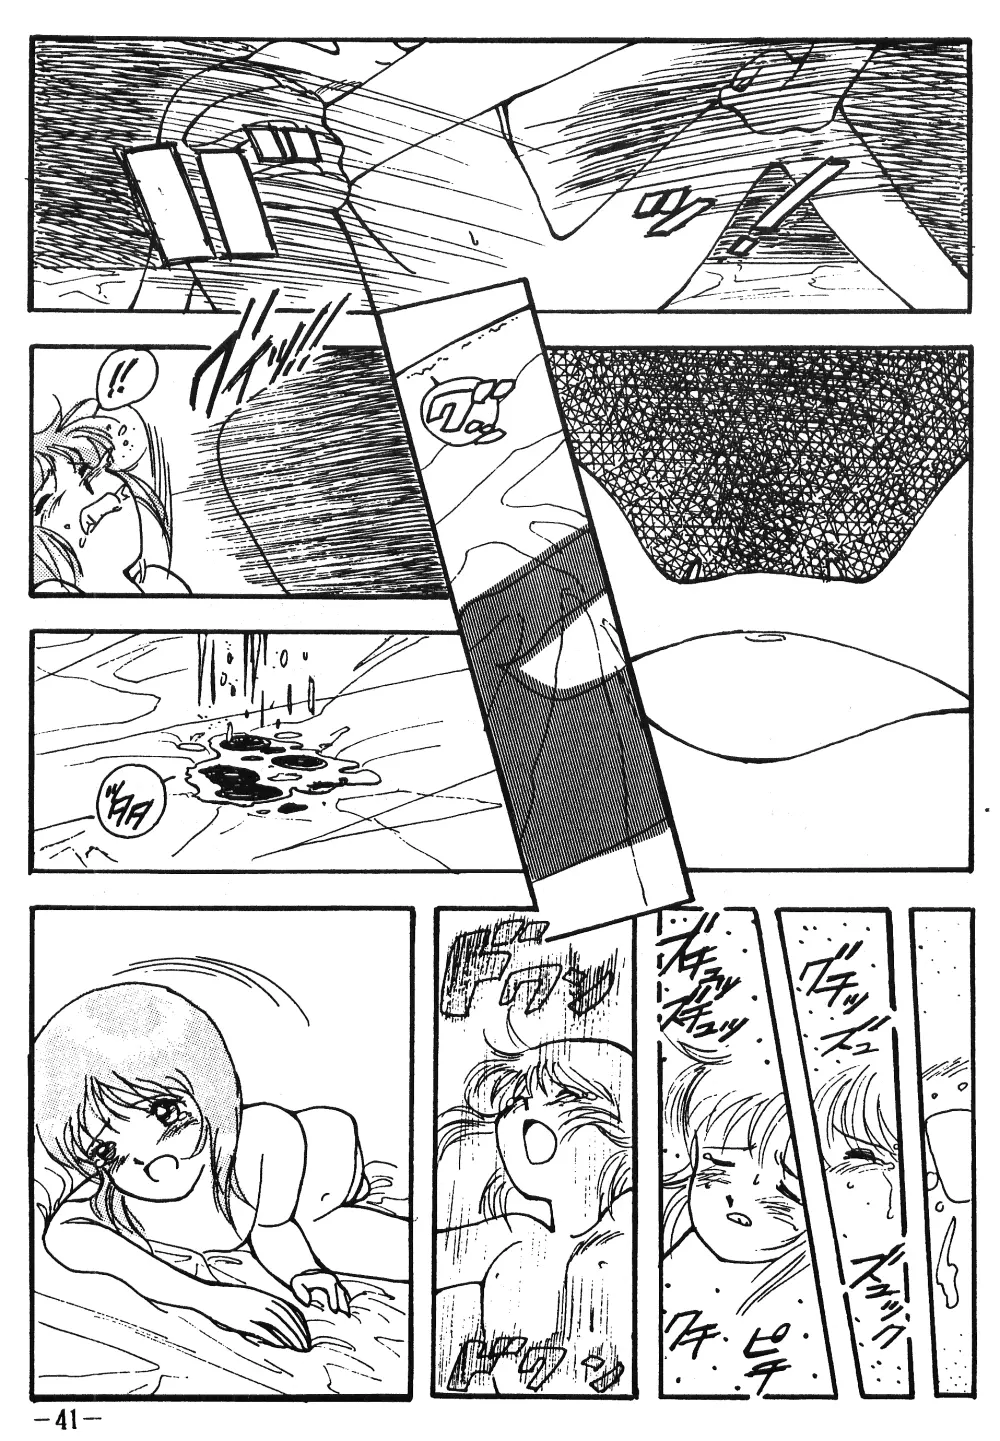 Fro2 Fight Vol. 1 Page.41